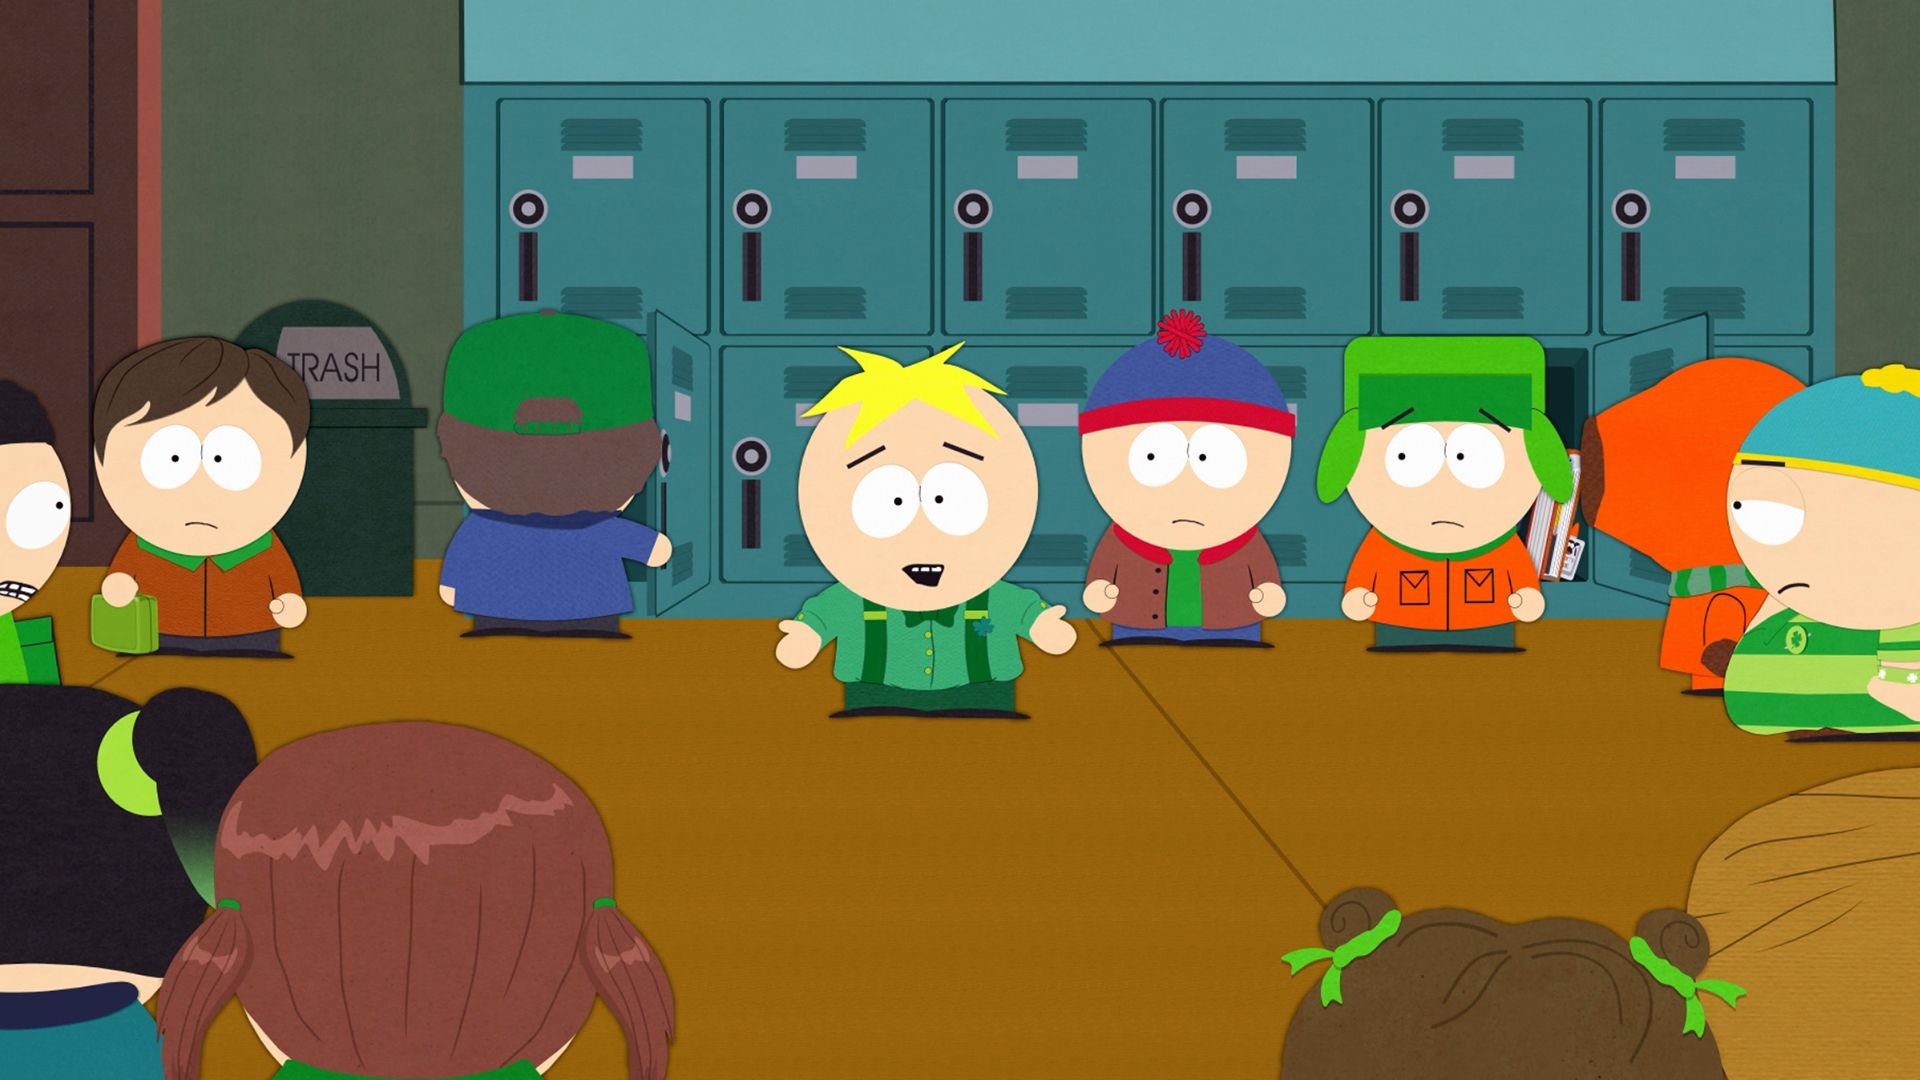 South Park takes the piss out of St. Patrick’s Day in its latest holiday special